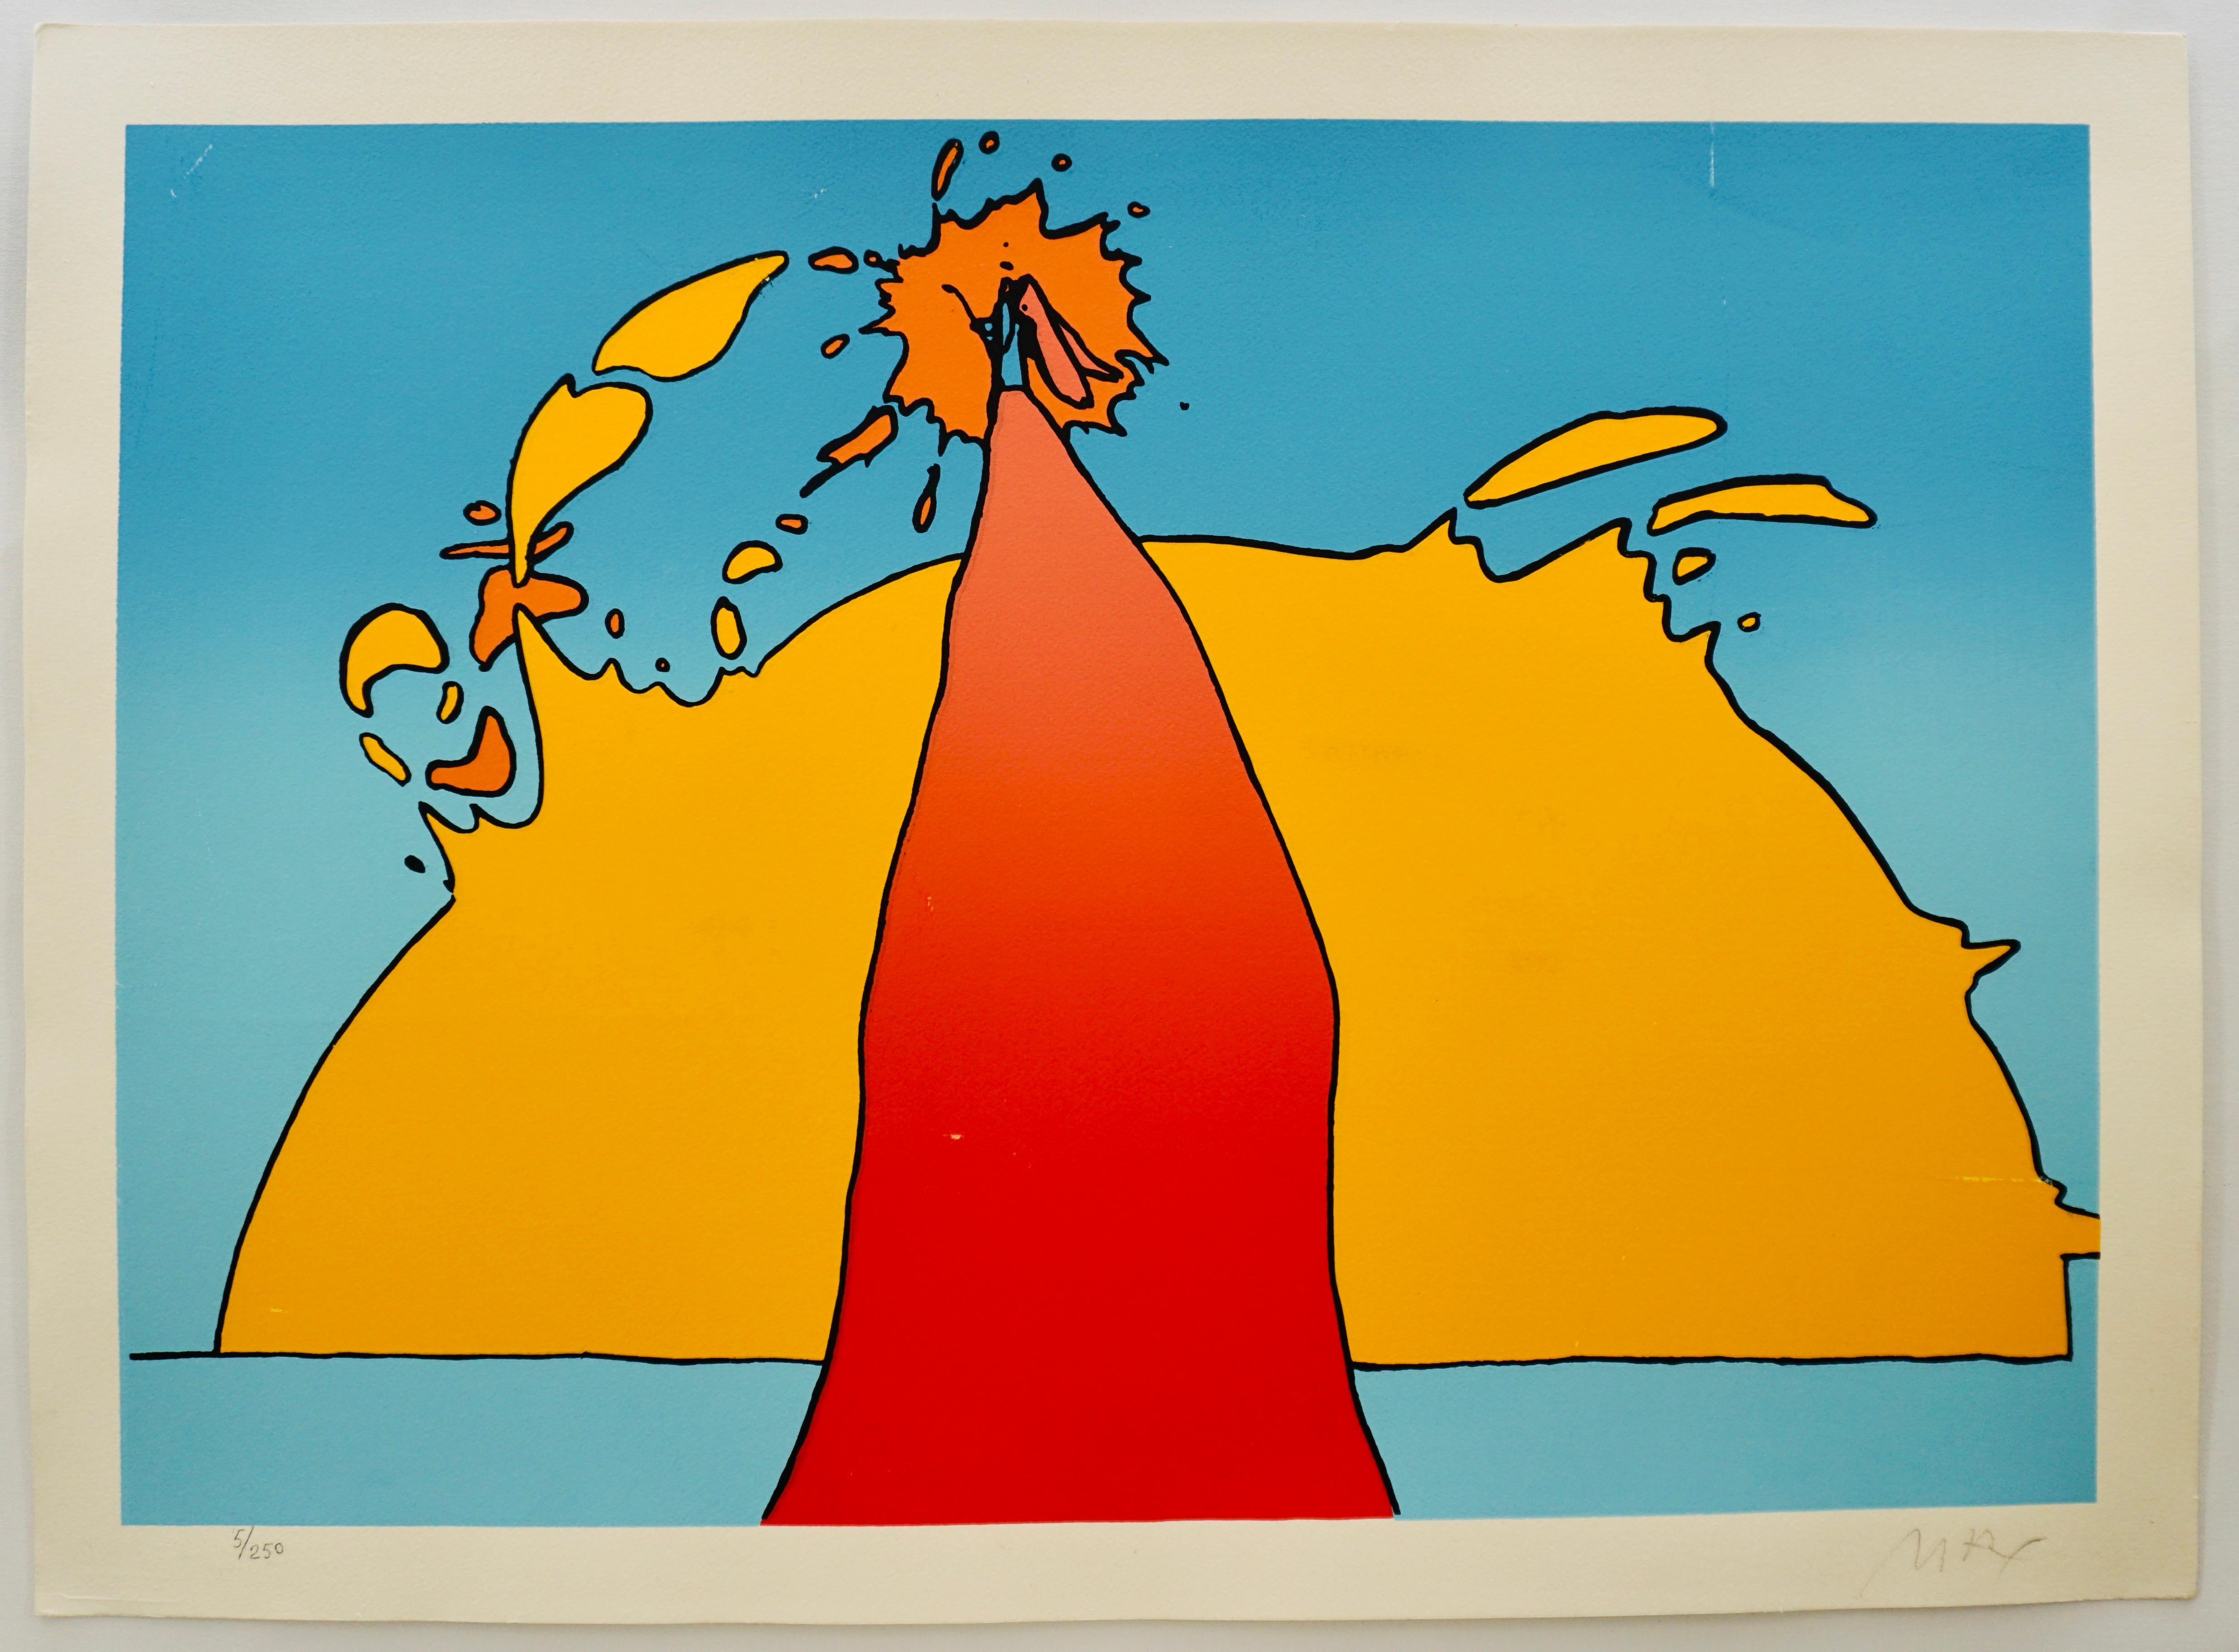 His Own Eclipse - Print by Peter Max